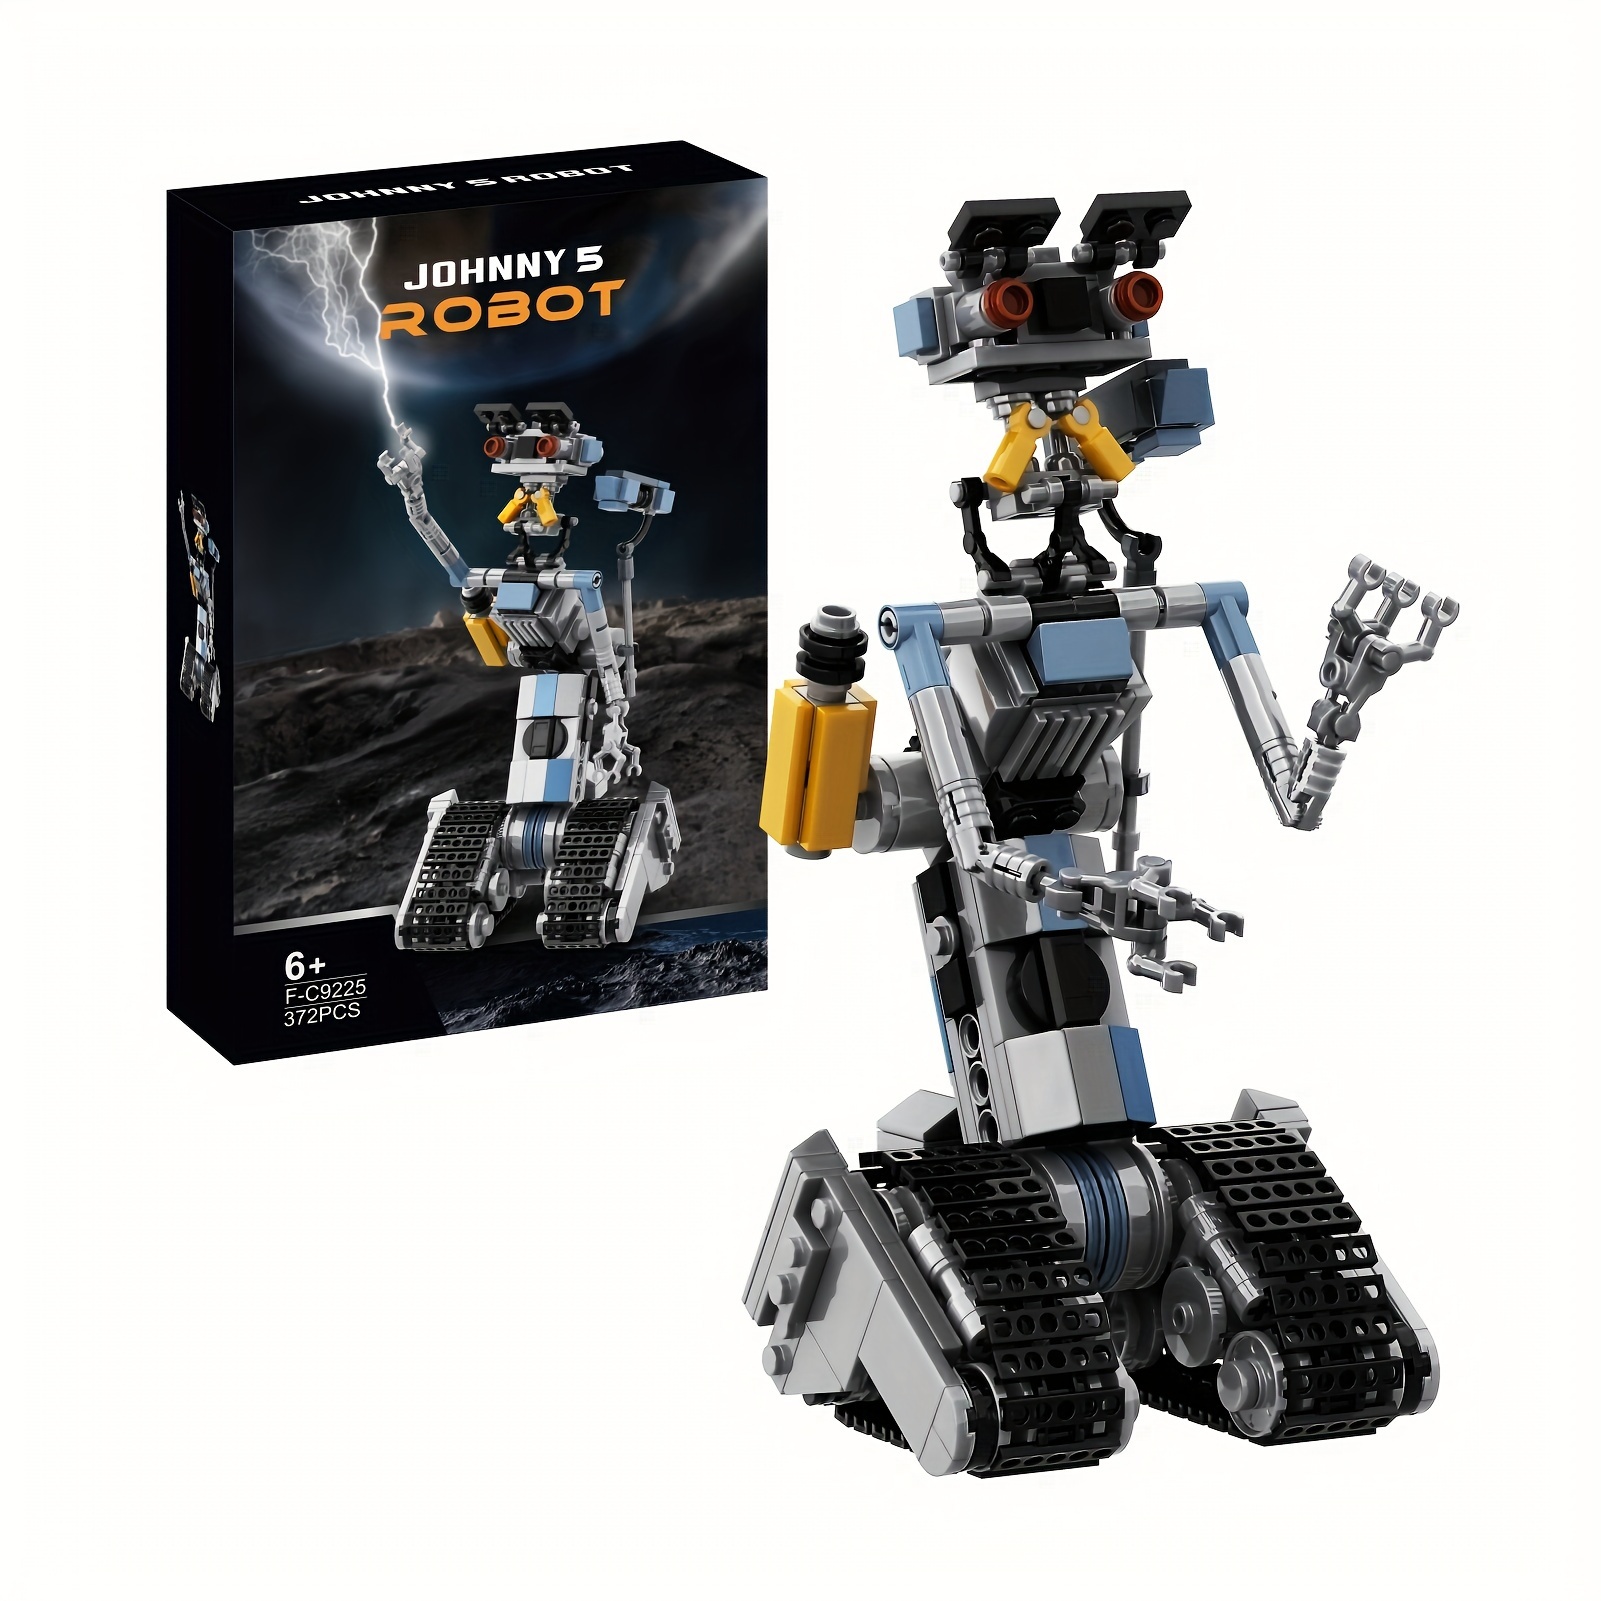 

369 Pieces Popular Movie Robot Building Blocks Playsets Johnny 5 Fans Must Buy Building Blocks Toys Exquisite Room Puzzles Ornaments Best Gift For Friends Kids